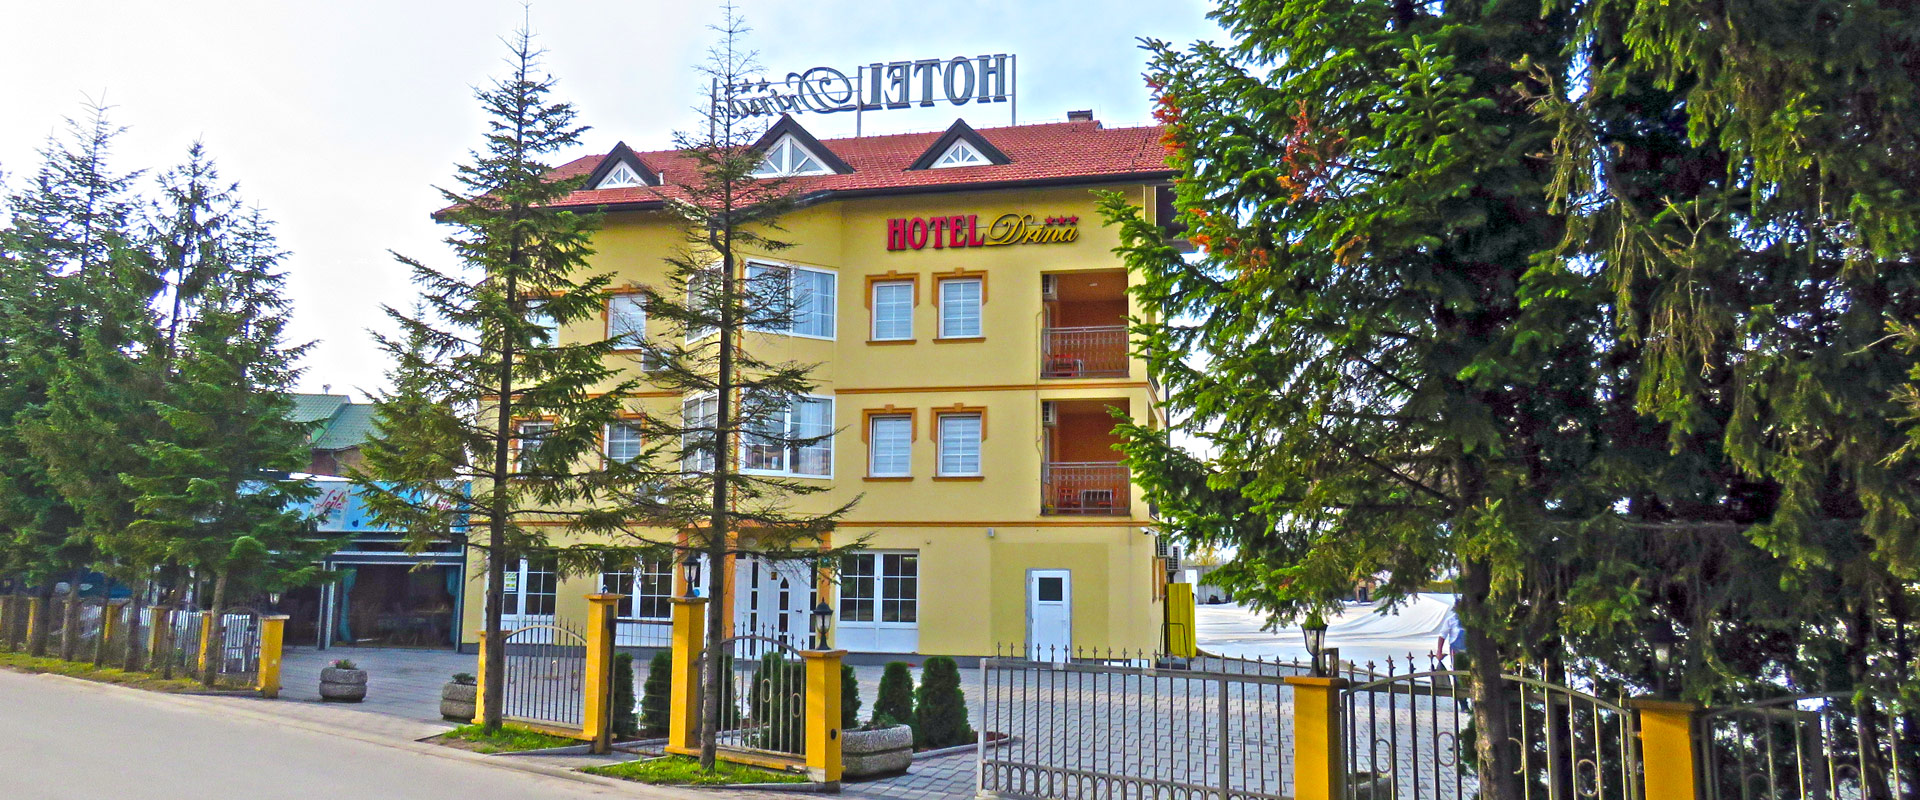 <p style="text-align: right;"><em><strong>Premium hotel</strong></em></p> <p style="text-align: right;"><strong>Drina</strong></p> <p style="text-align: right;">Sarajevo</p>